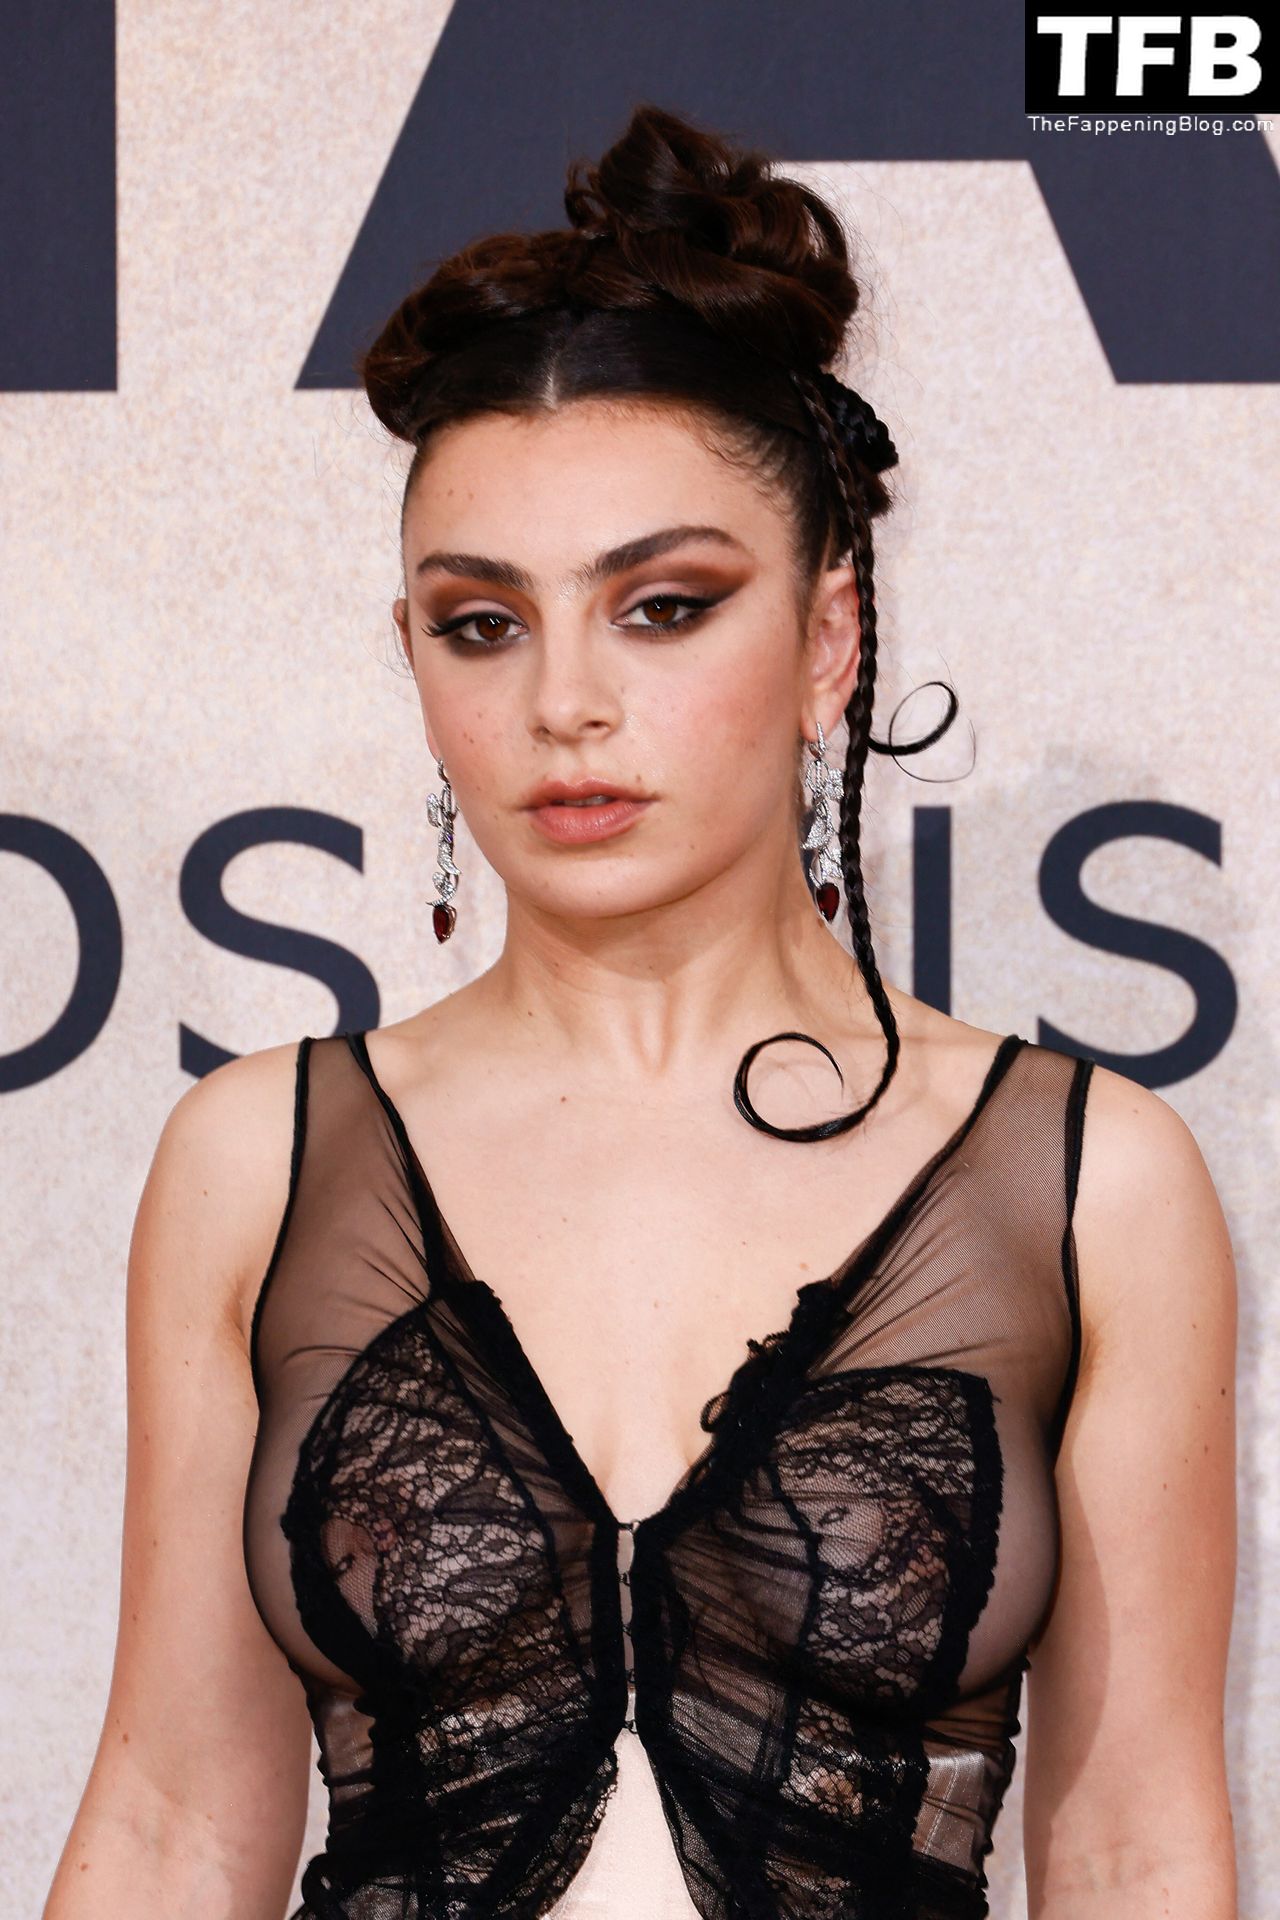 Charli-XCX-See-Through-Nude-The-Fappening-Blog-33.jpg